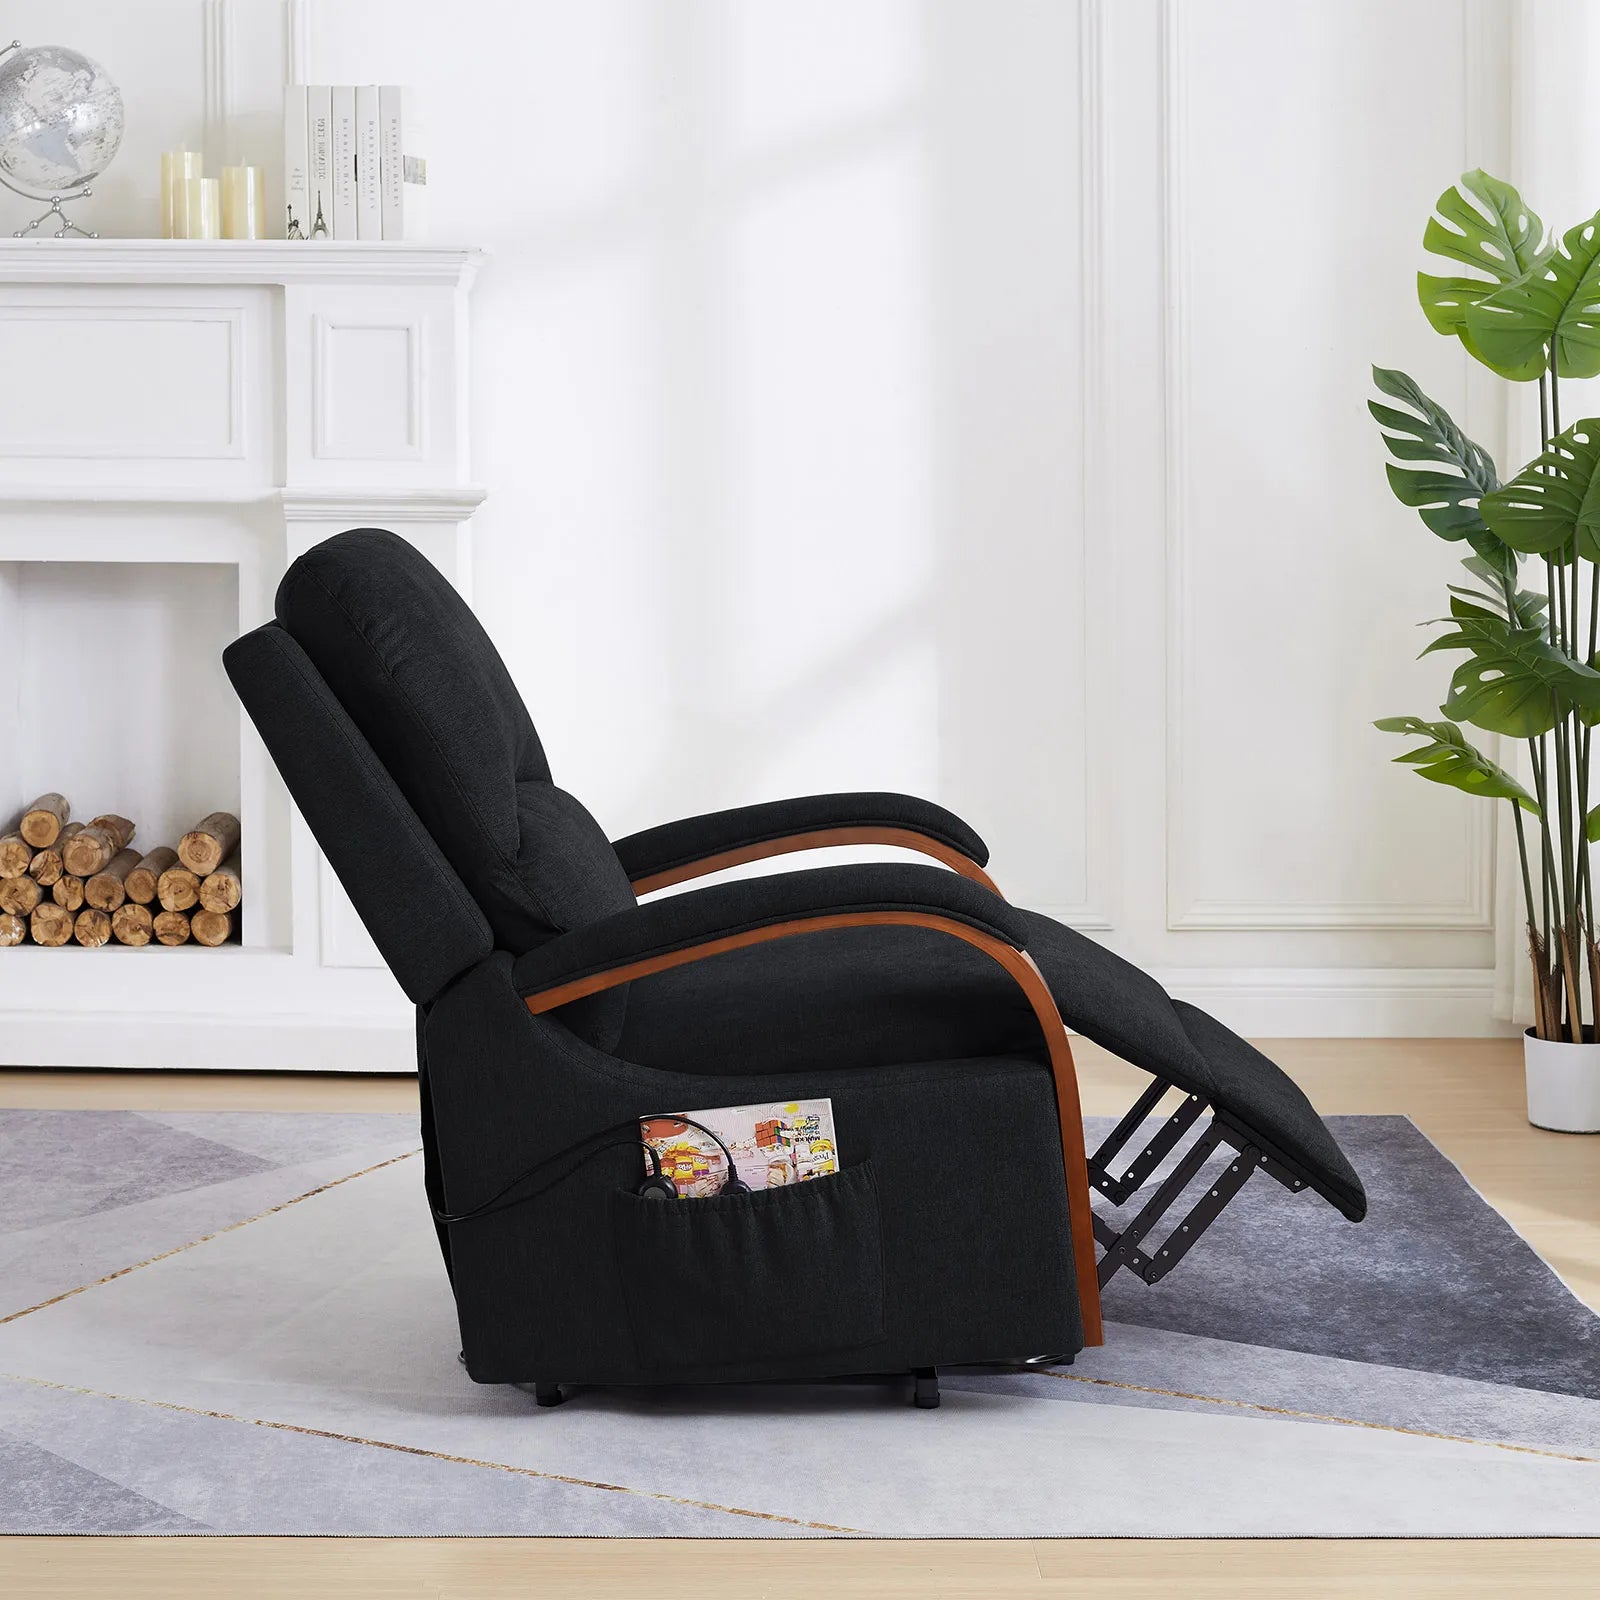 lift recliner with wood armrest